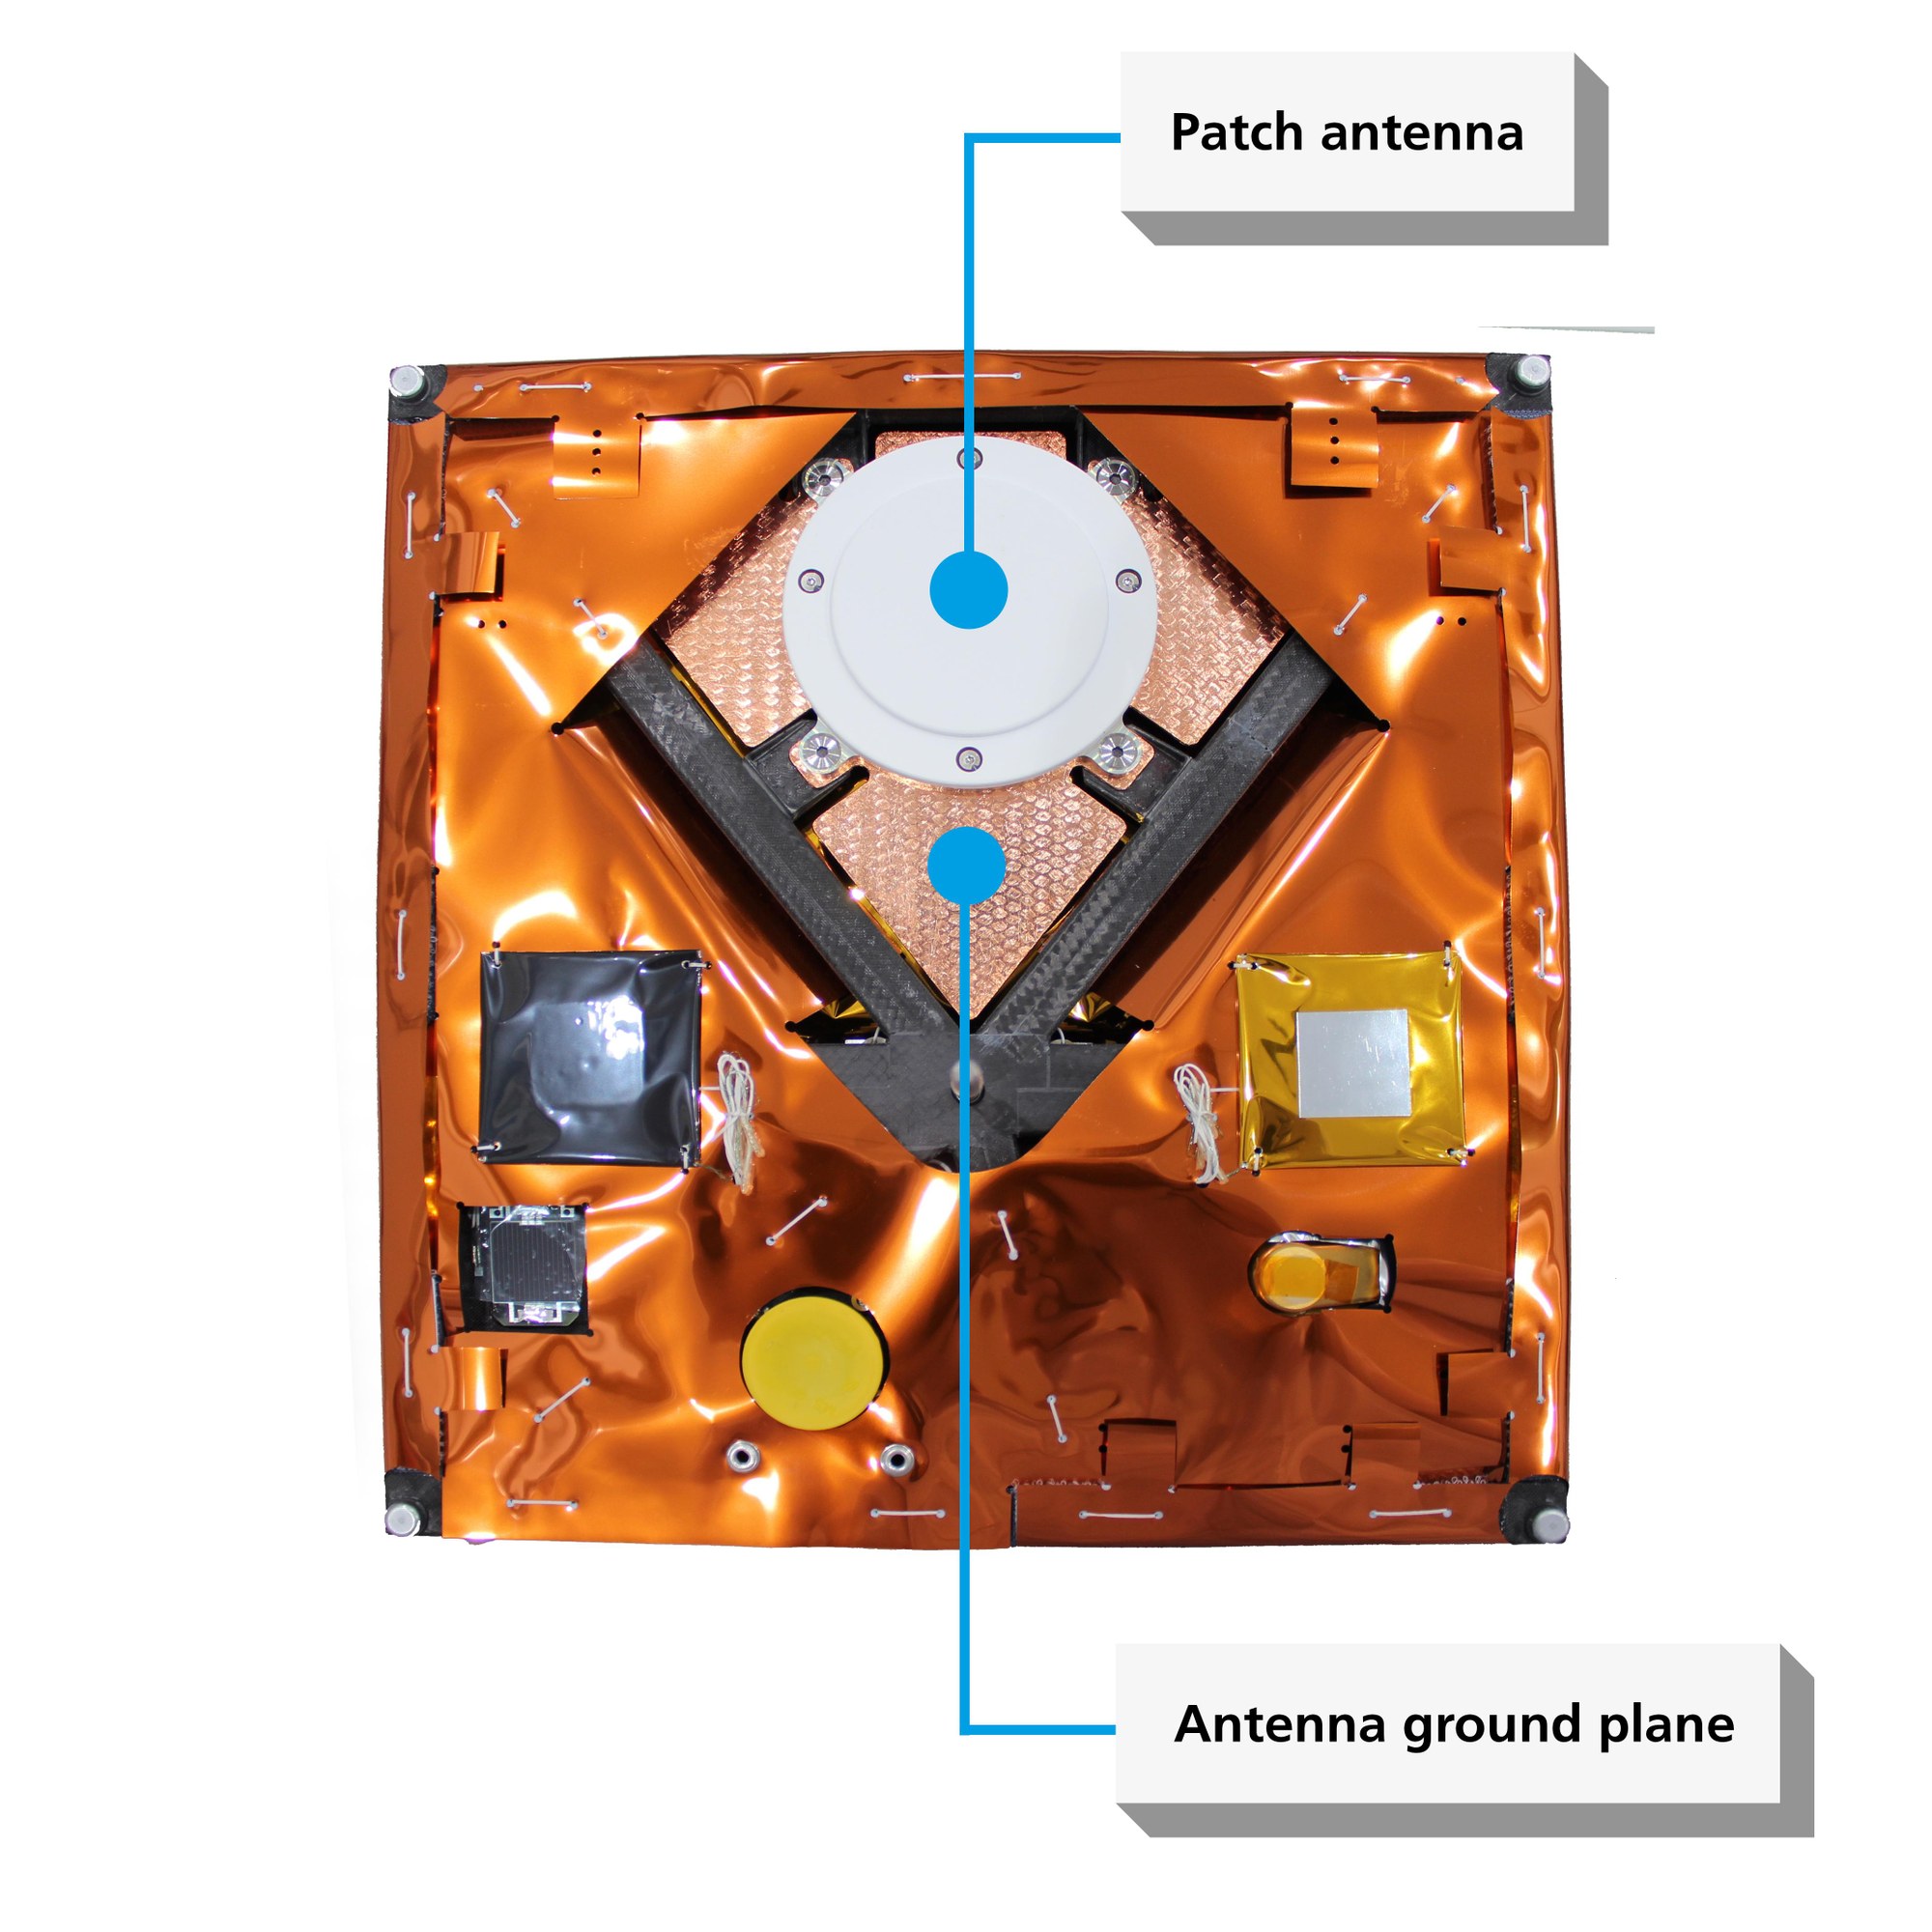 The antenna ground plane, specifically influencing the emission characteristics of the lower patch antenna, is also made of CFRP fabric